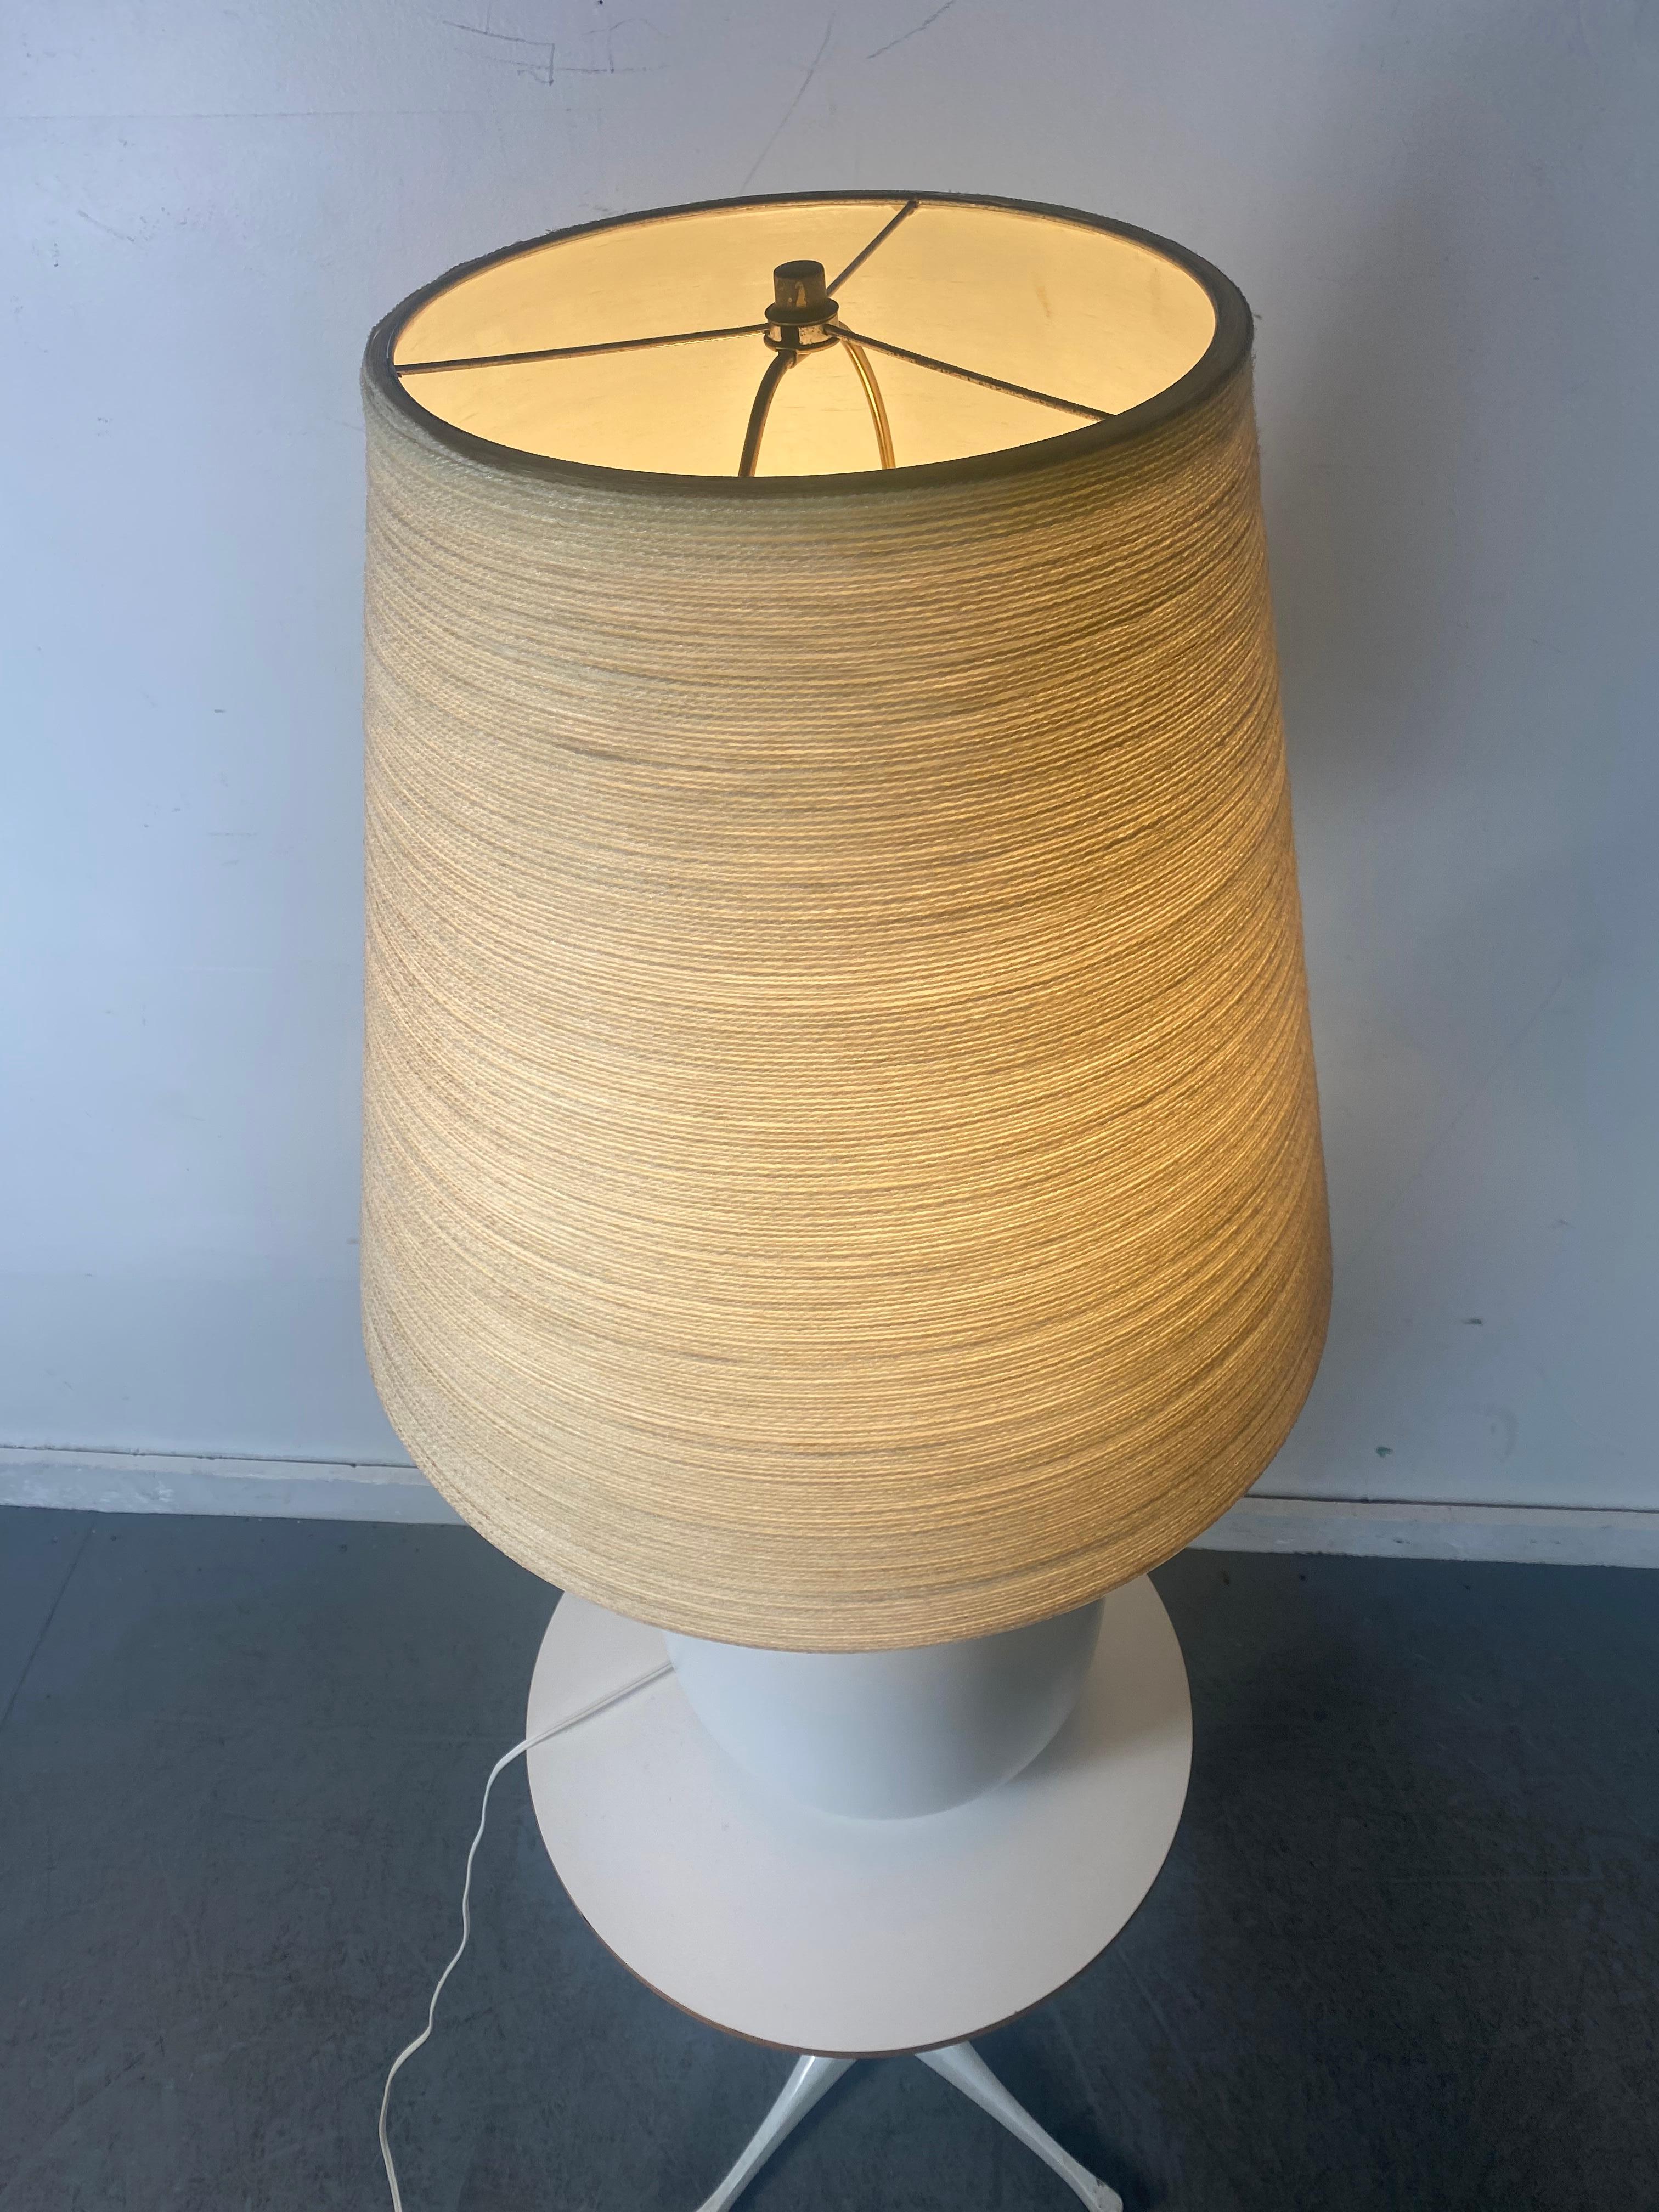 Large White Ceramic Lotte & Gunnar Bostlund Lamp In Good Condition For Sale In Buffalo, NY